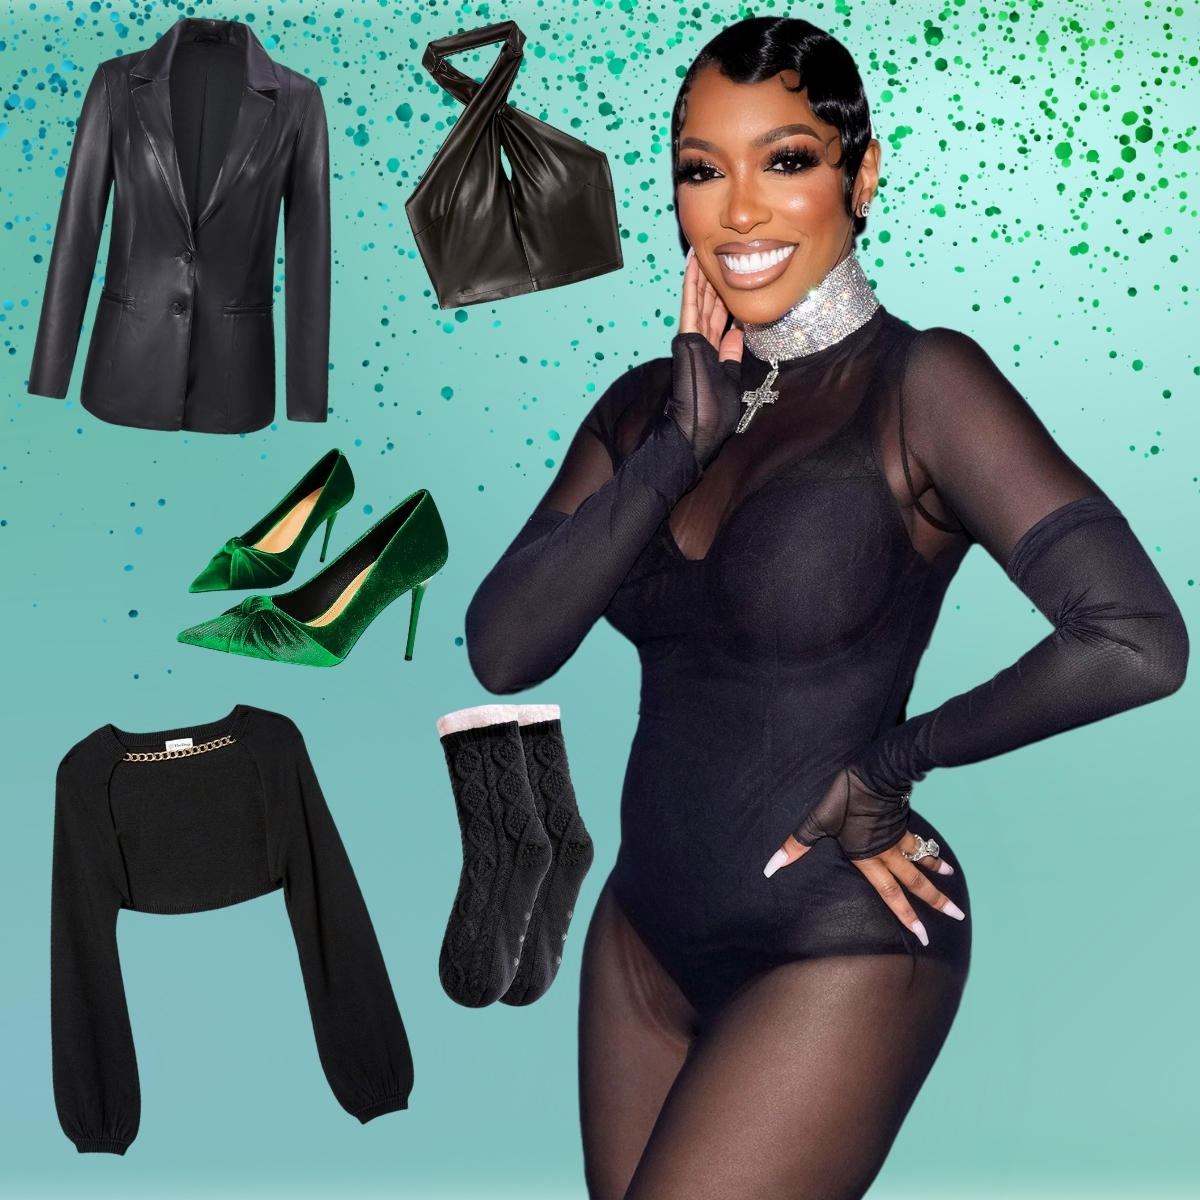 RHOA's Porsha Williams’ Holiday Style Guide Has Styles That Ship Fast